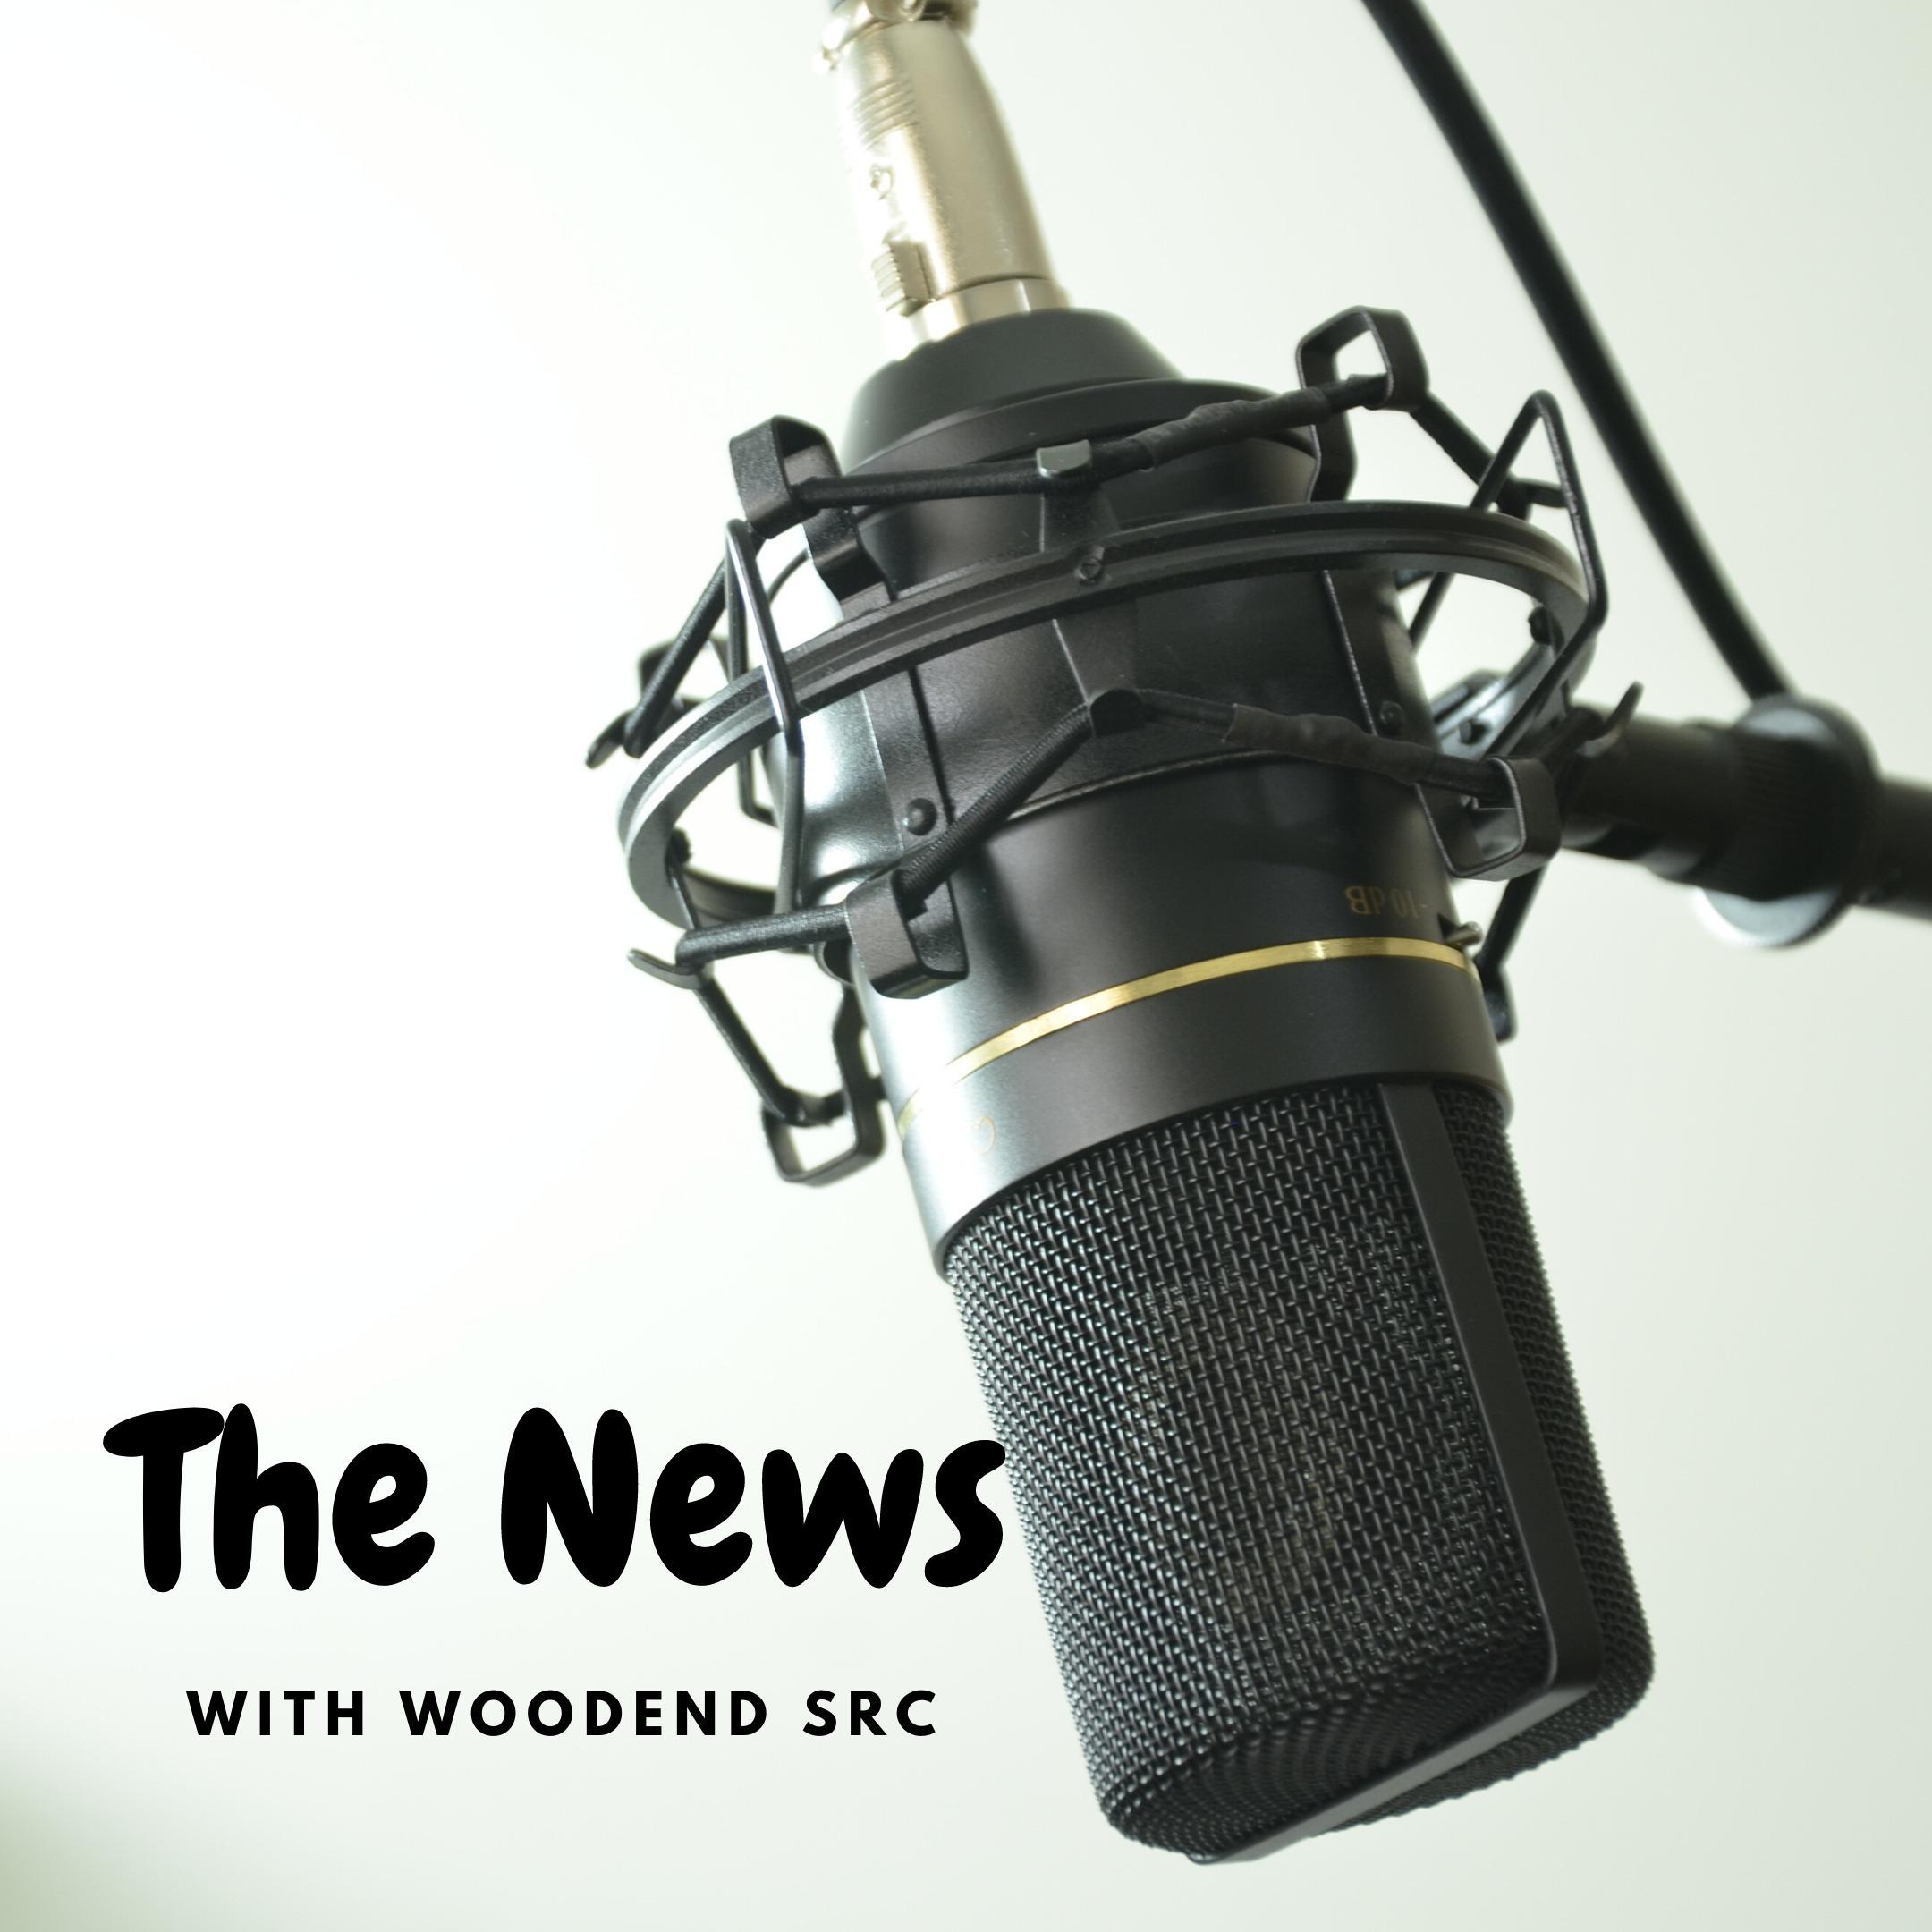 The News: With Woodend SRC